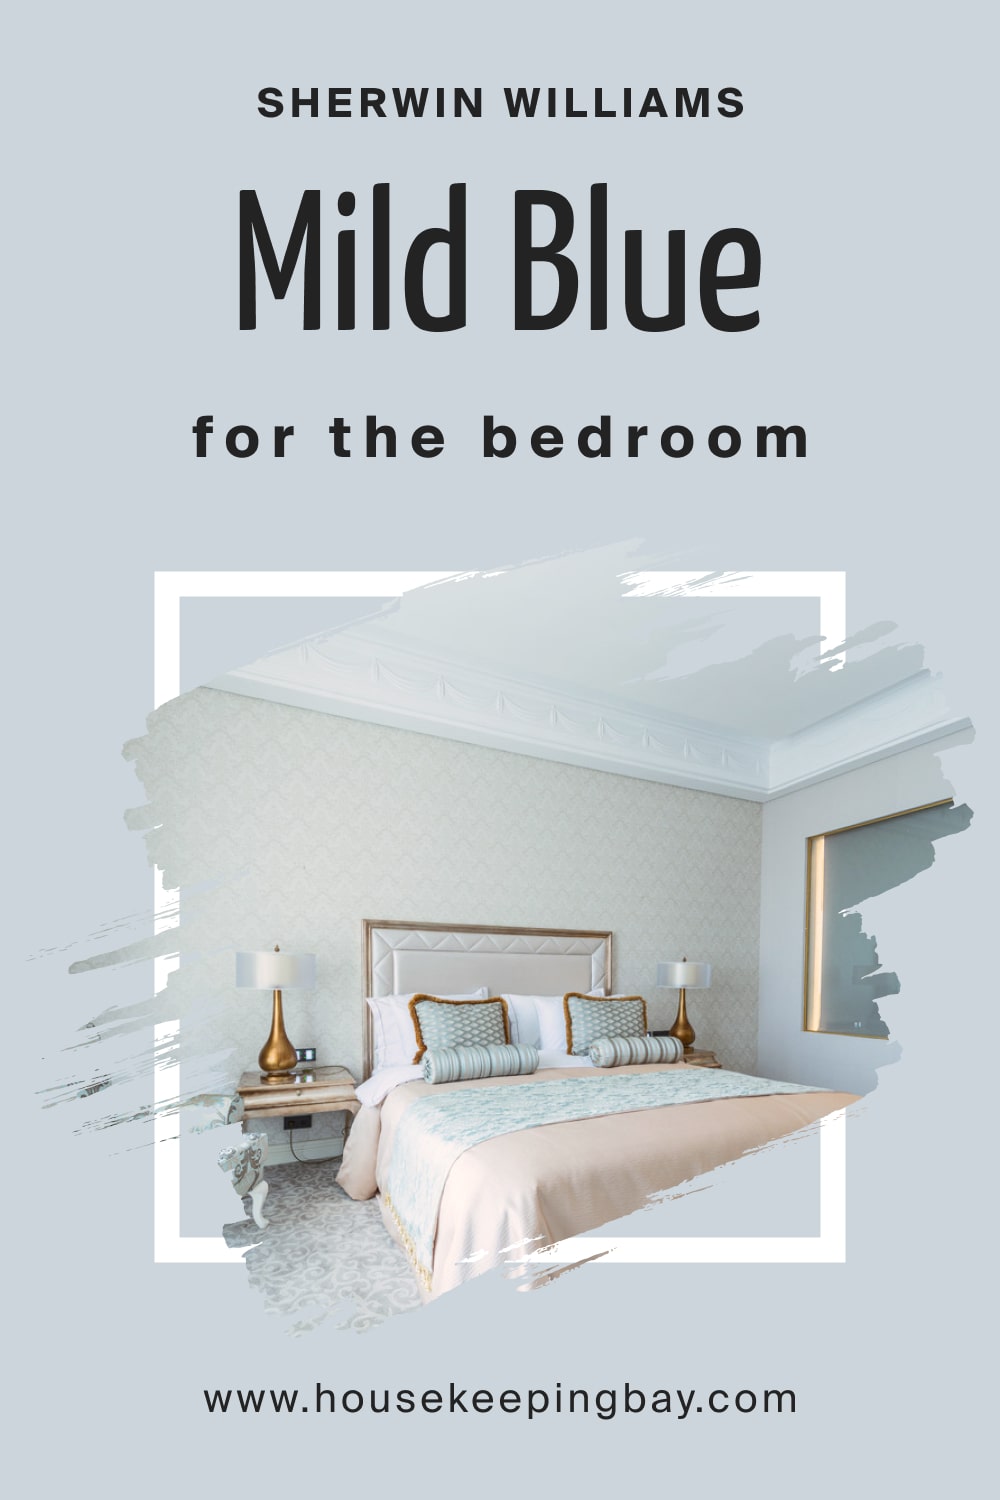 Sherwin Williams. Mild Blue SW 6533 For the bedroom